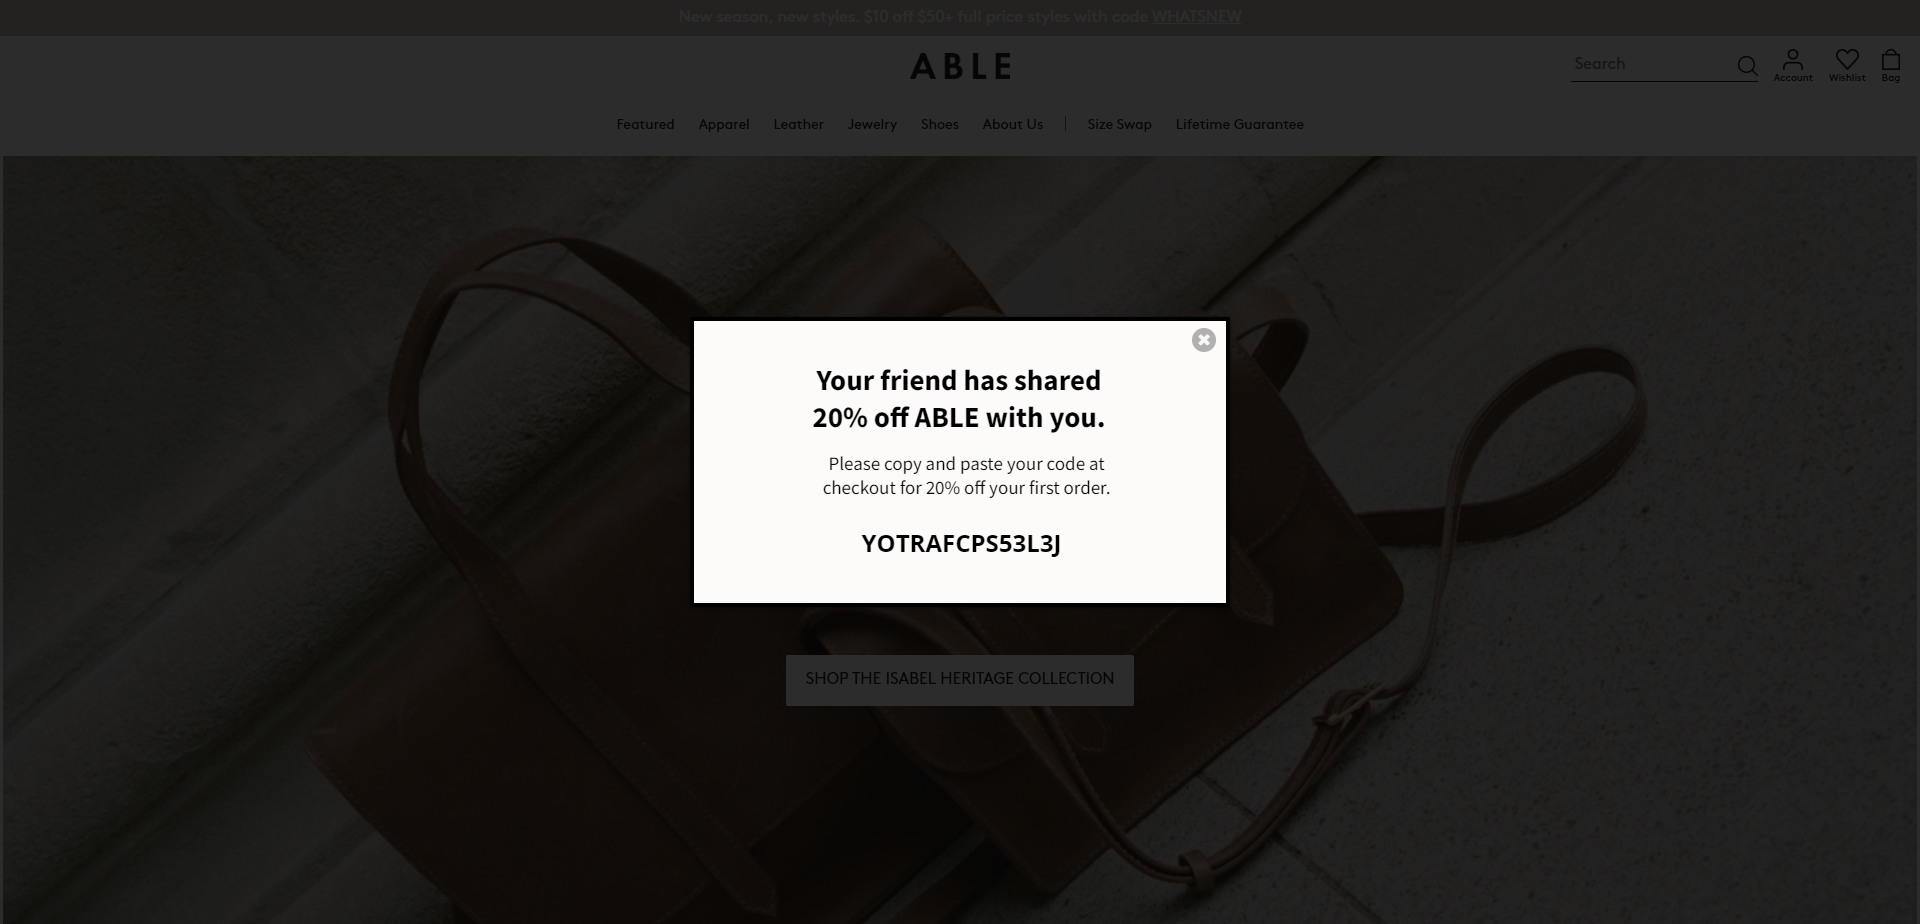 Referral Landing Page for Live Fashionable